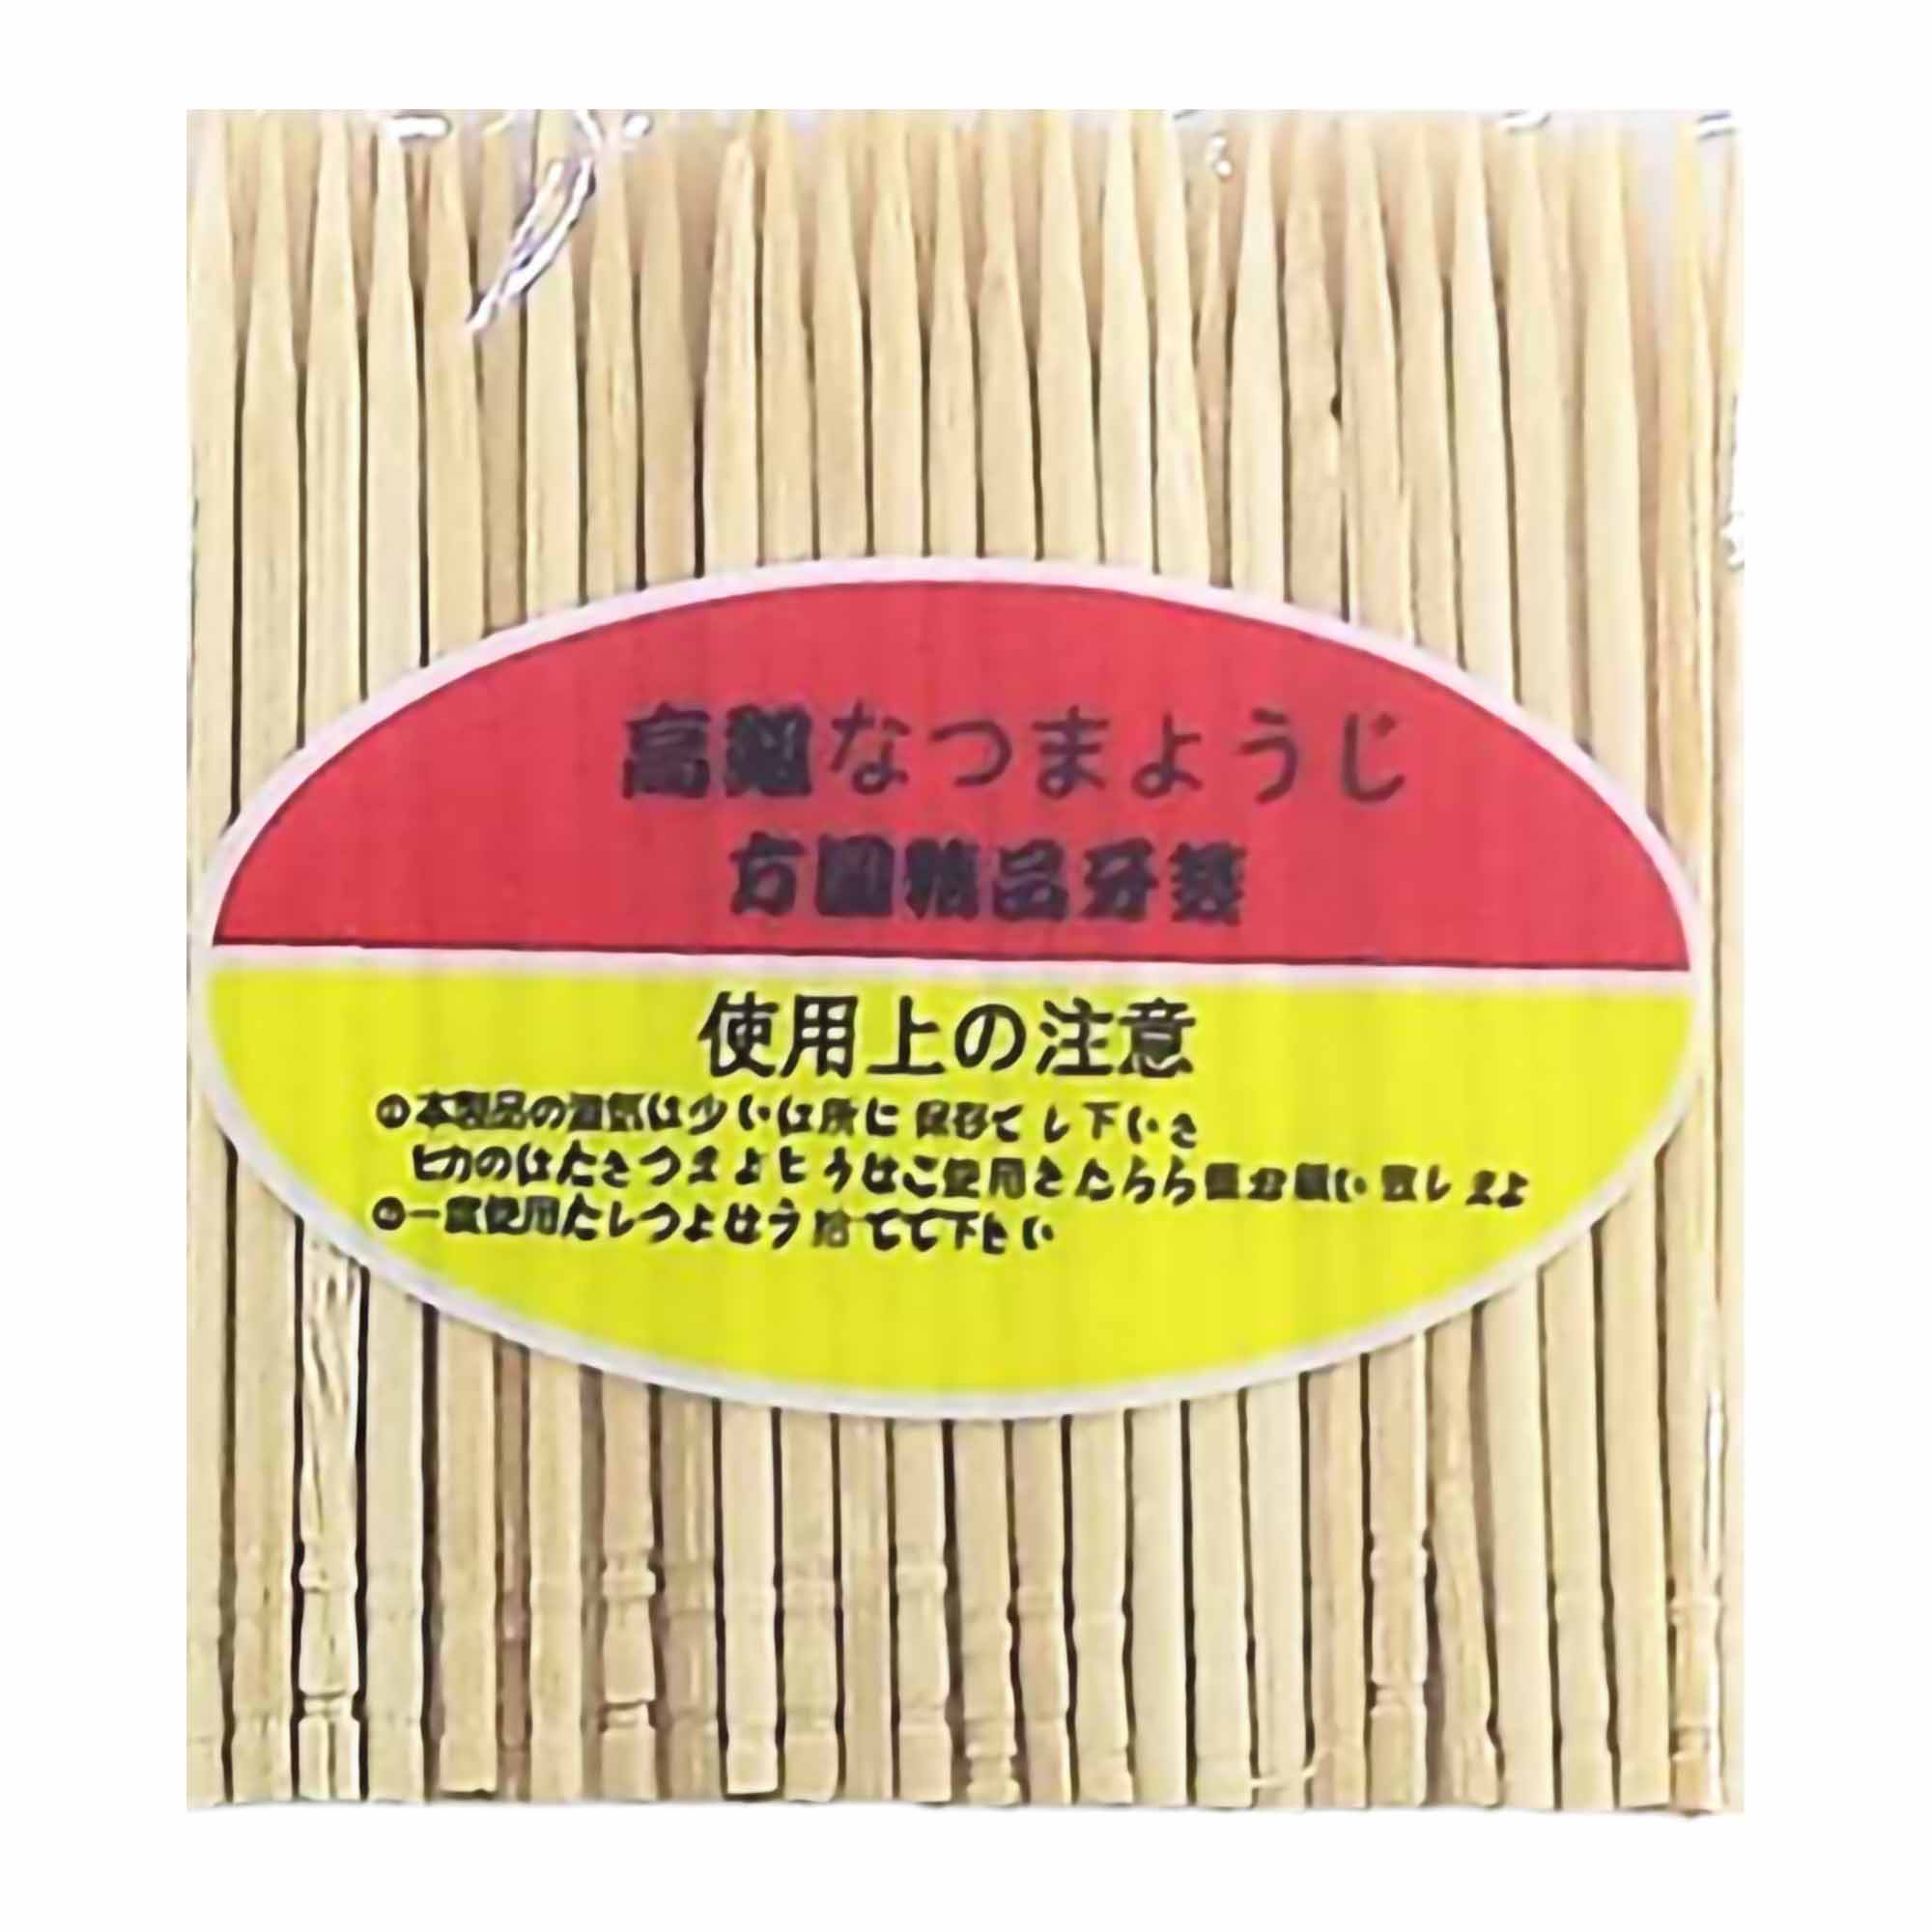 wood-stick-natural-wooden-bamboo-toothpick-party-food-pick-oral-care-tooth-clean